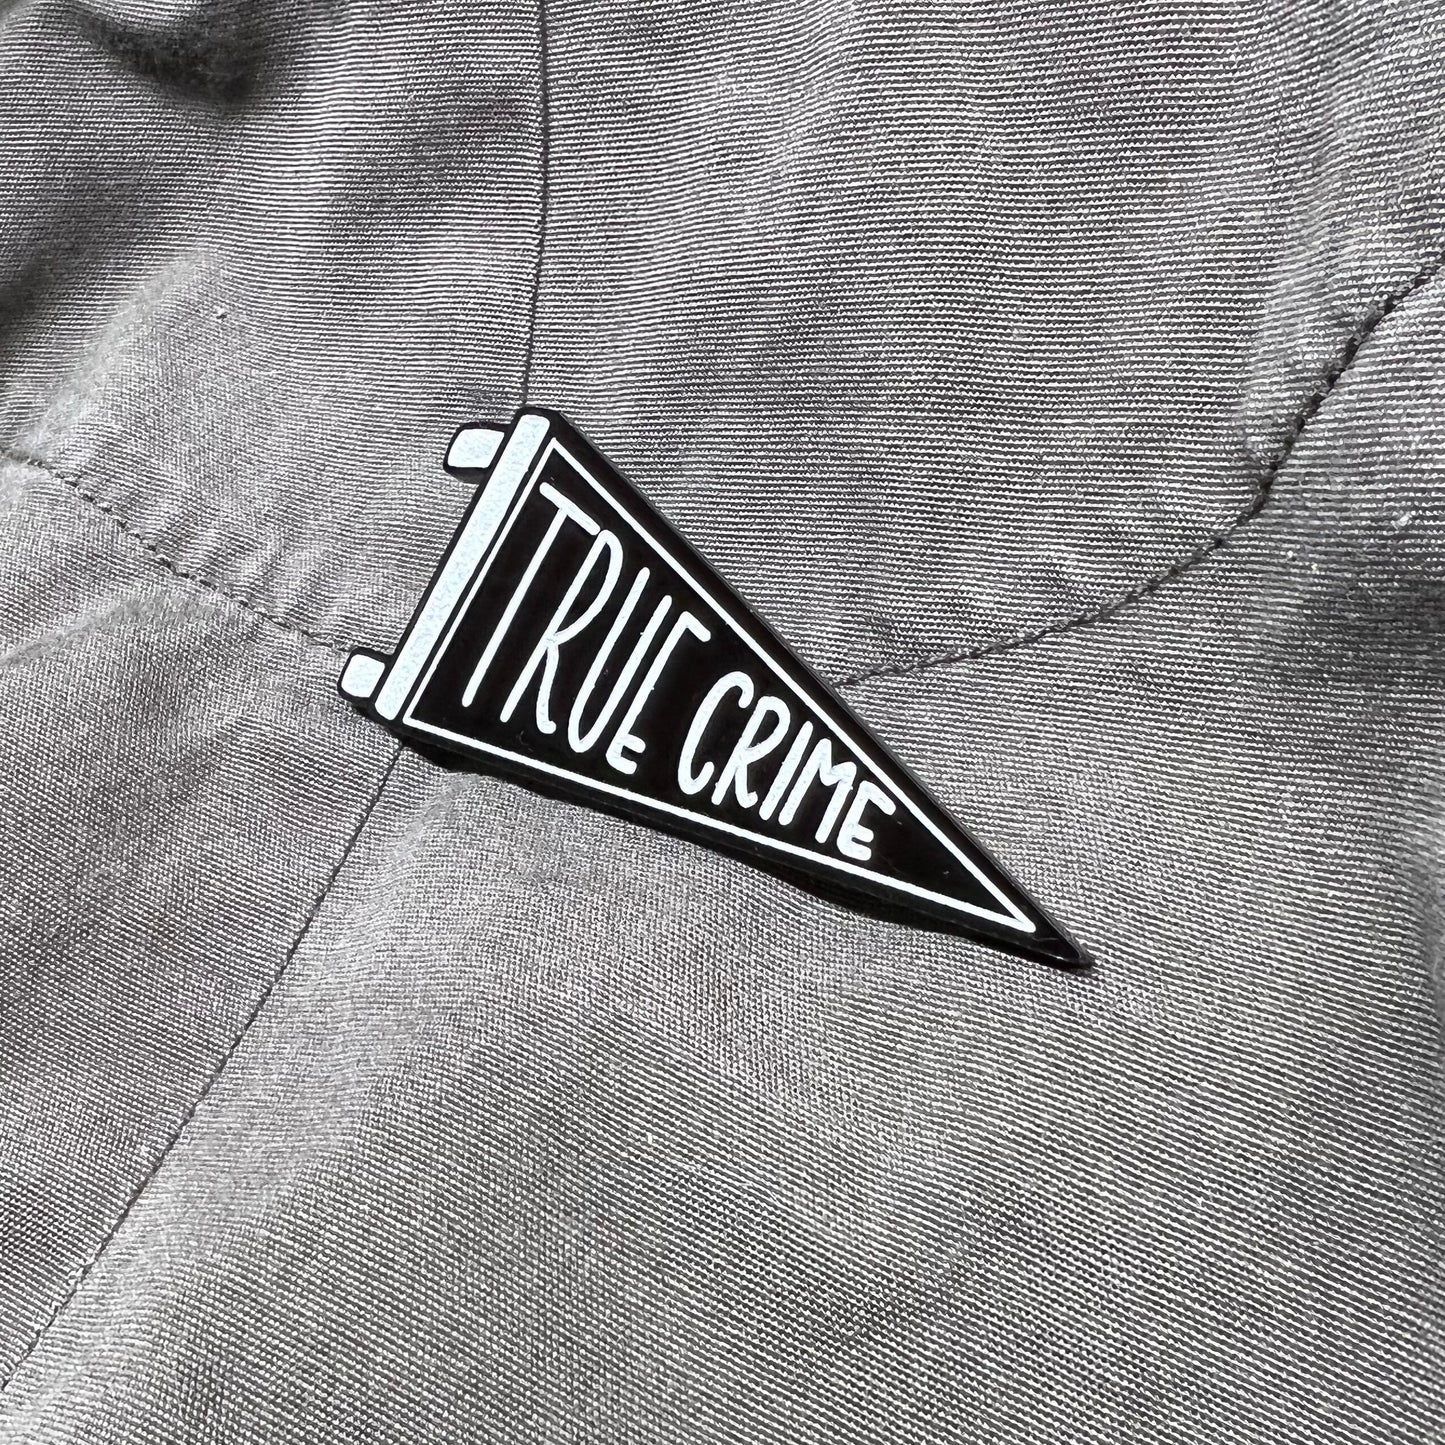 TRUE CRIME Pin Pennant Badge - Laser Cut Acrylic Brooch Accessory Pin back - gift for murderino